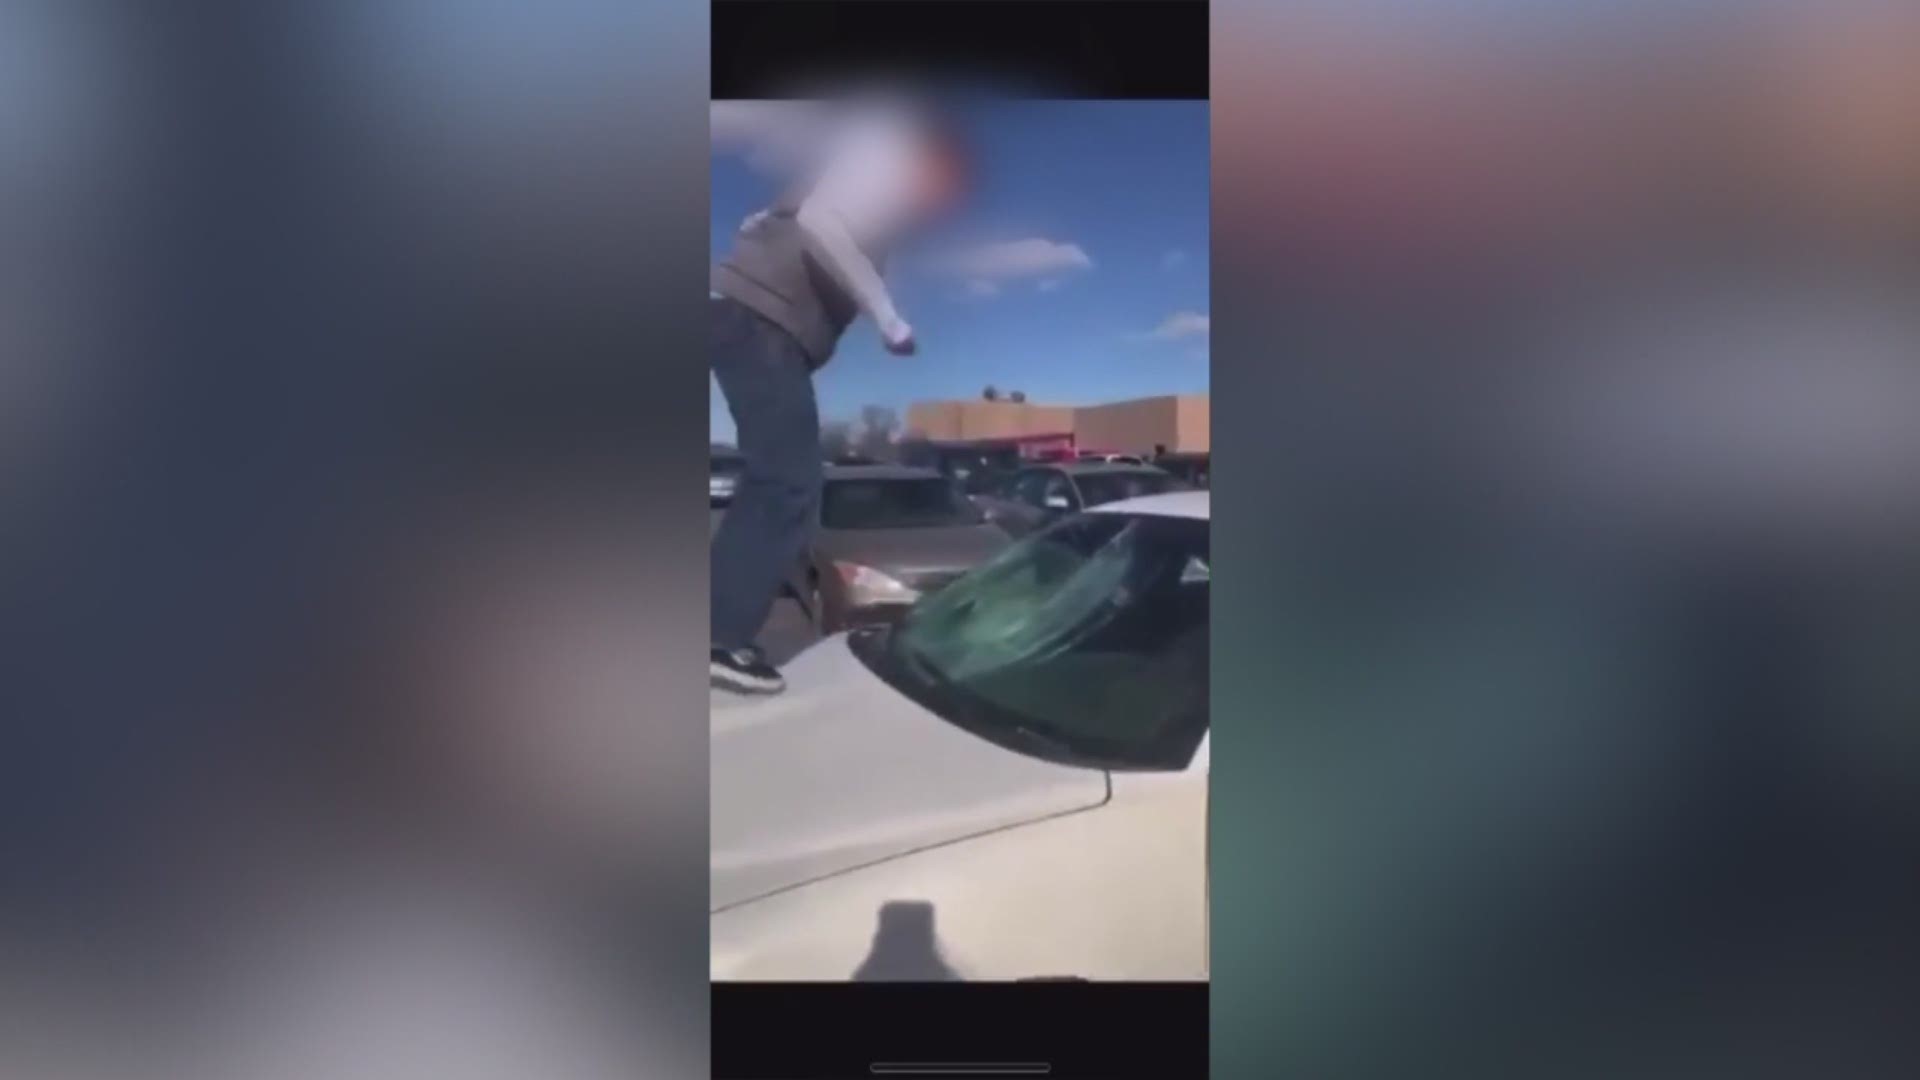 Shocking video of a car being smashed at West High School. The sophomore whose car was totalled speaks out.